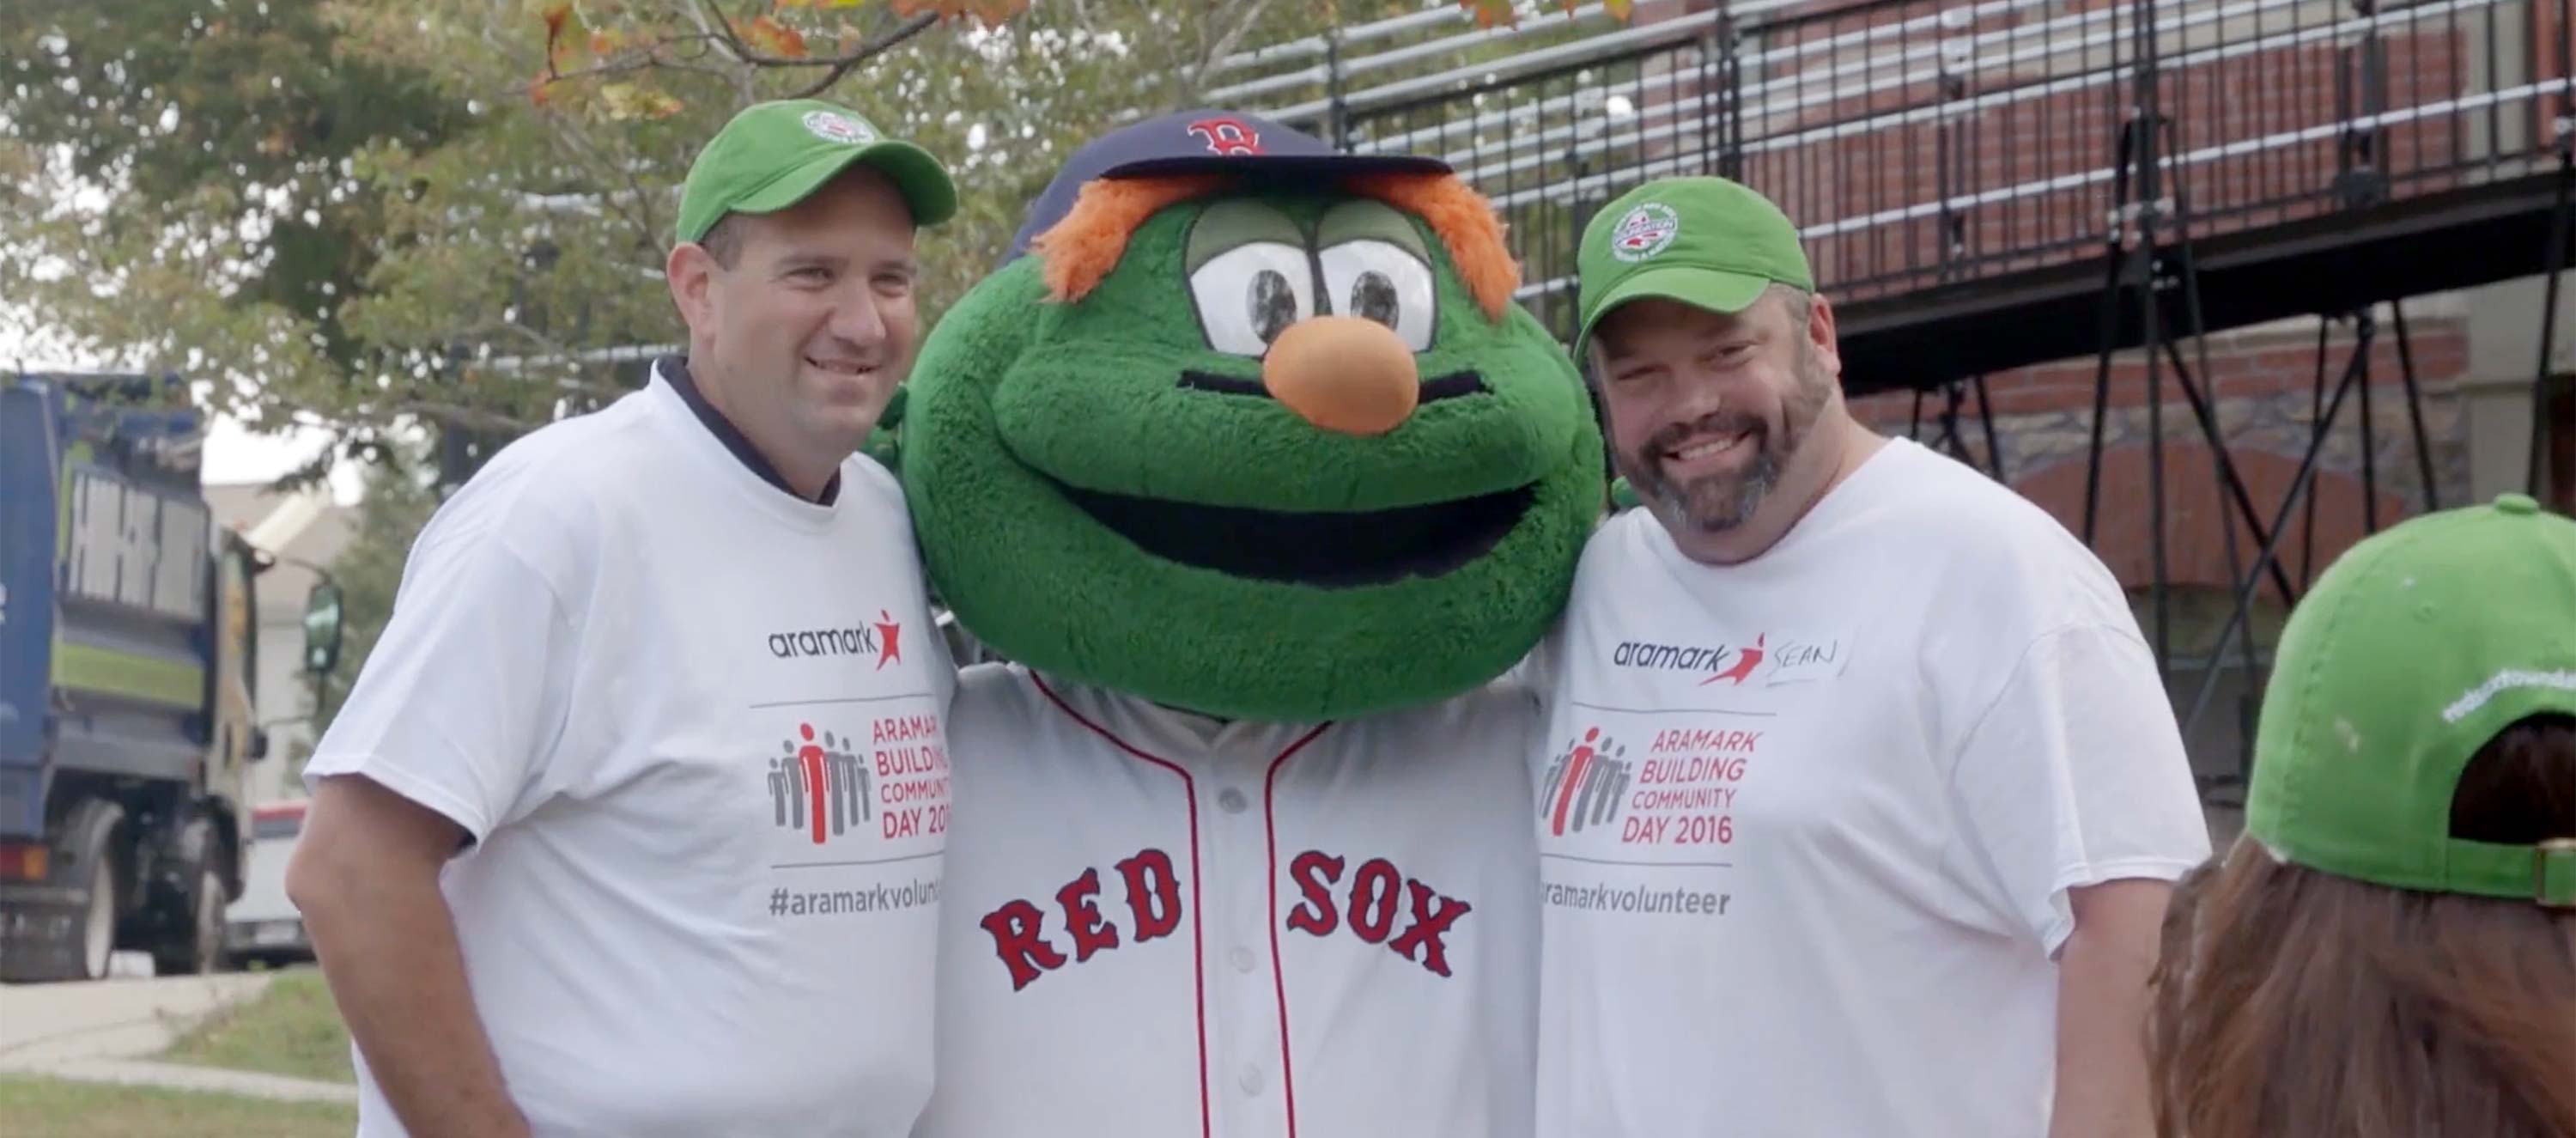 red sox foundation video created by Jackrabbit Design